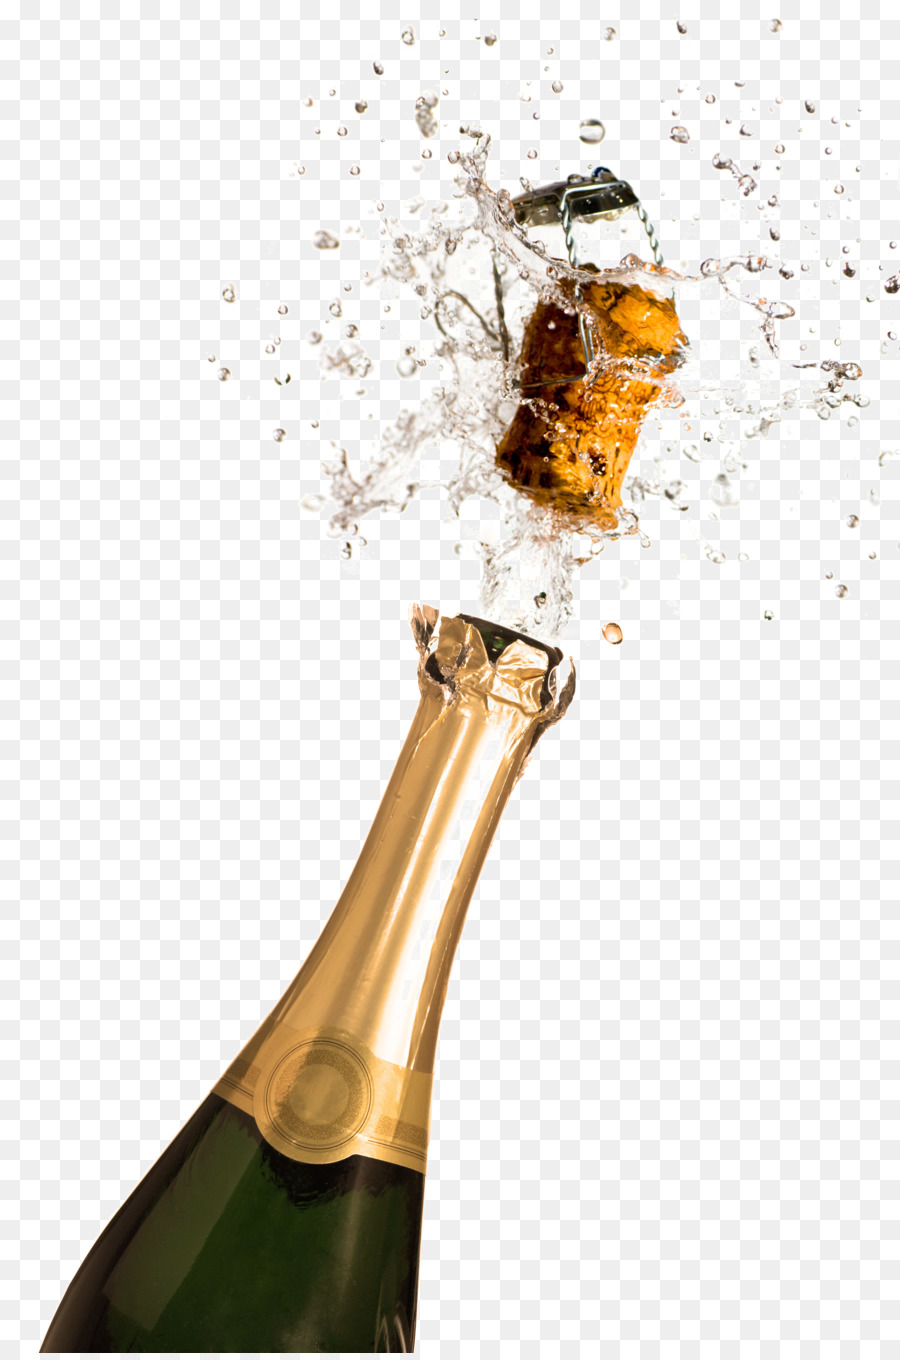 Champagne Wine Bottle - Open the champagne instant HD picture png download - 3992*6000 - Free Transparent Champagne png Download.